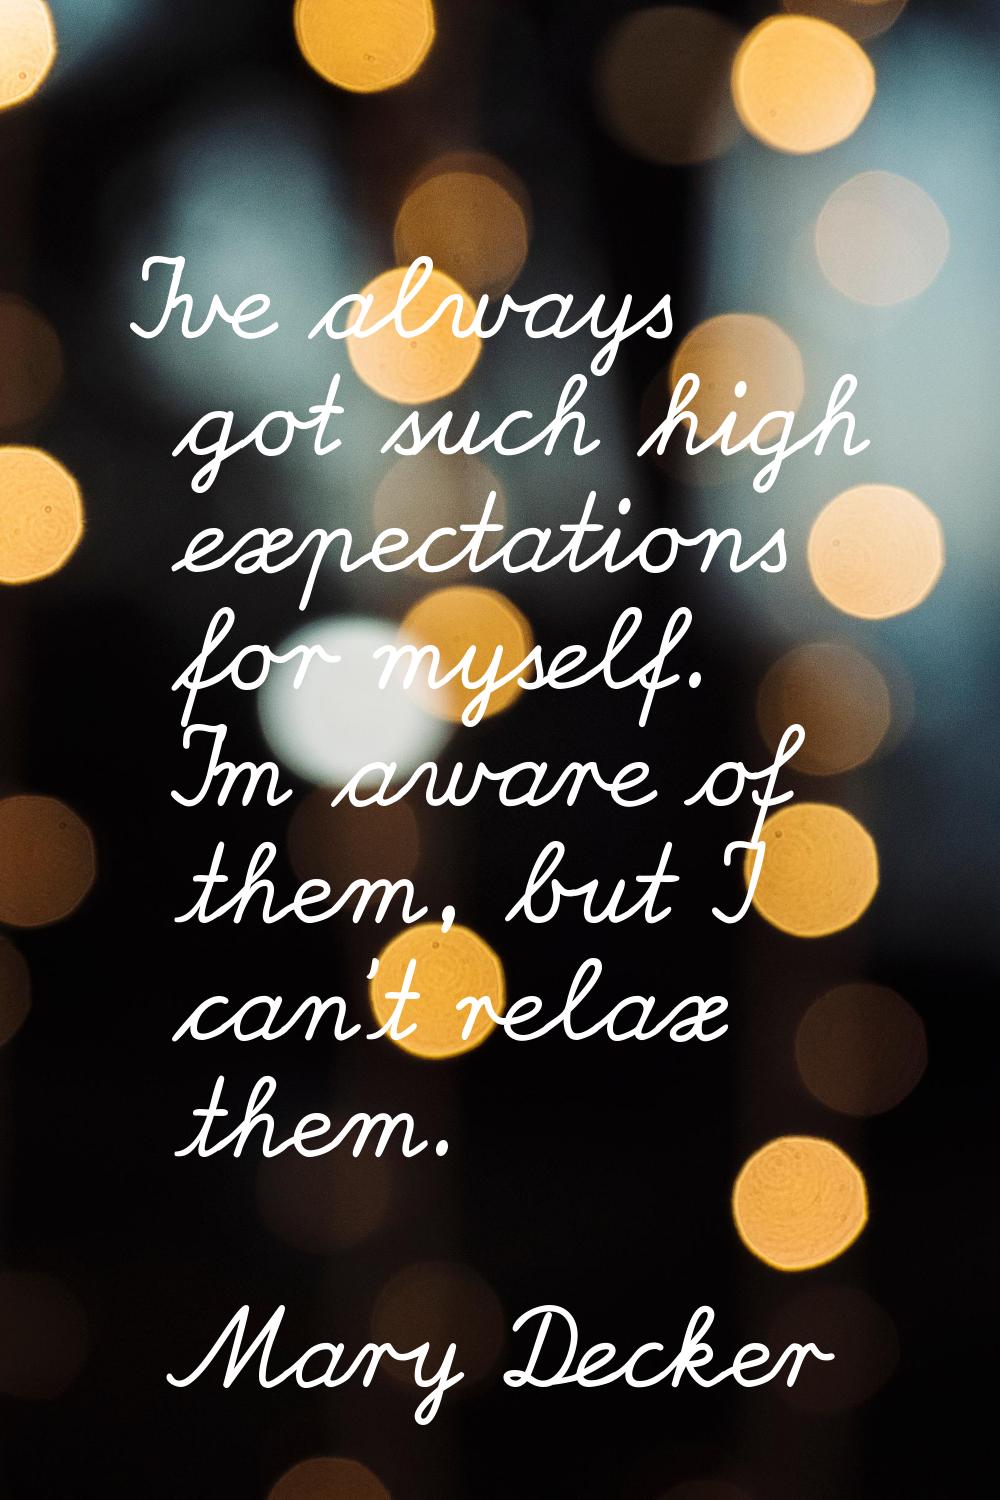 I've always got such high expectations for myself. I'm aware of them, but I can't relax them.